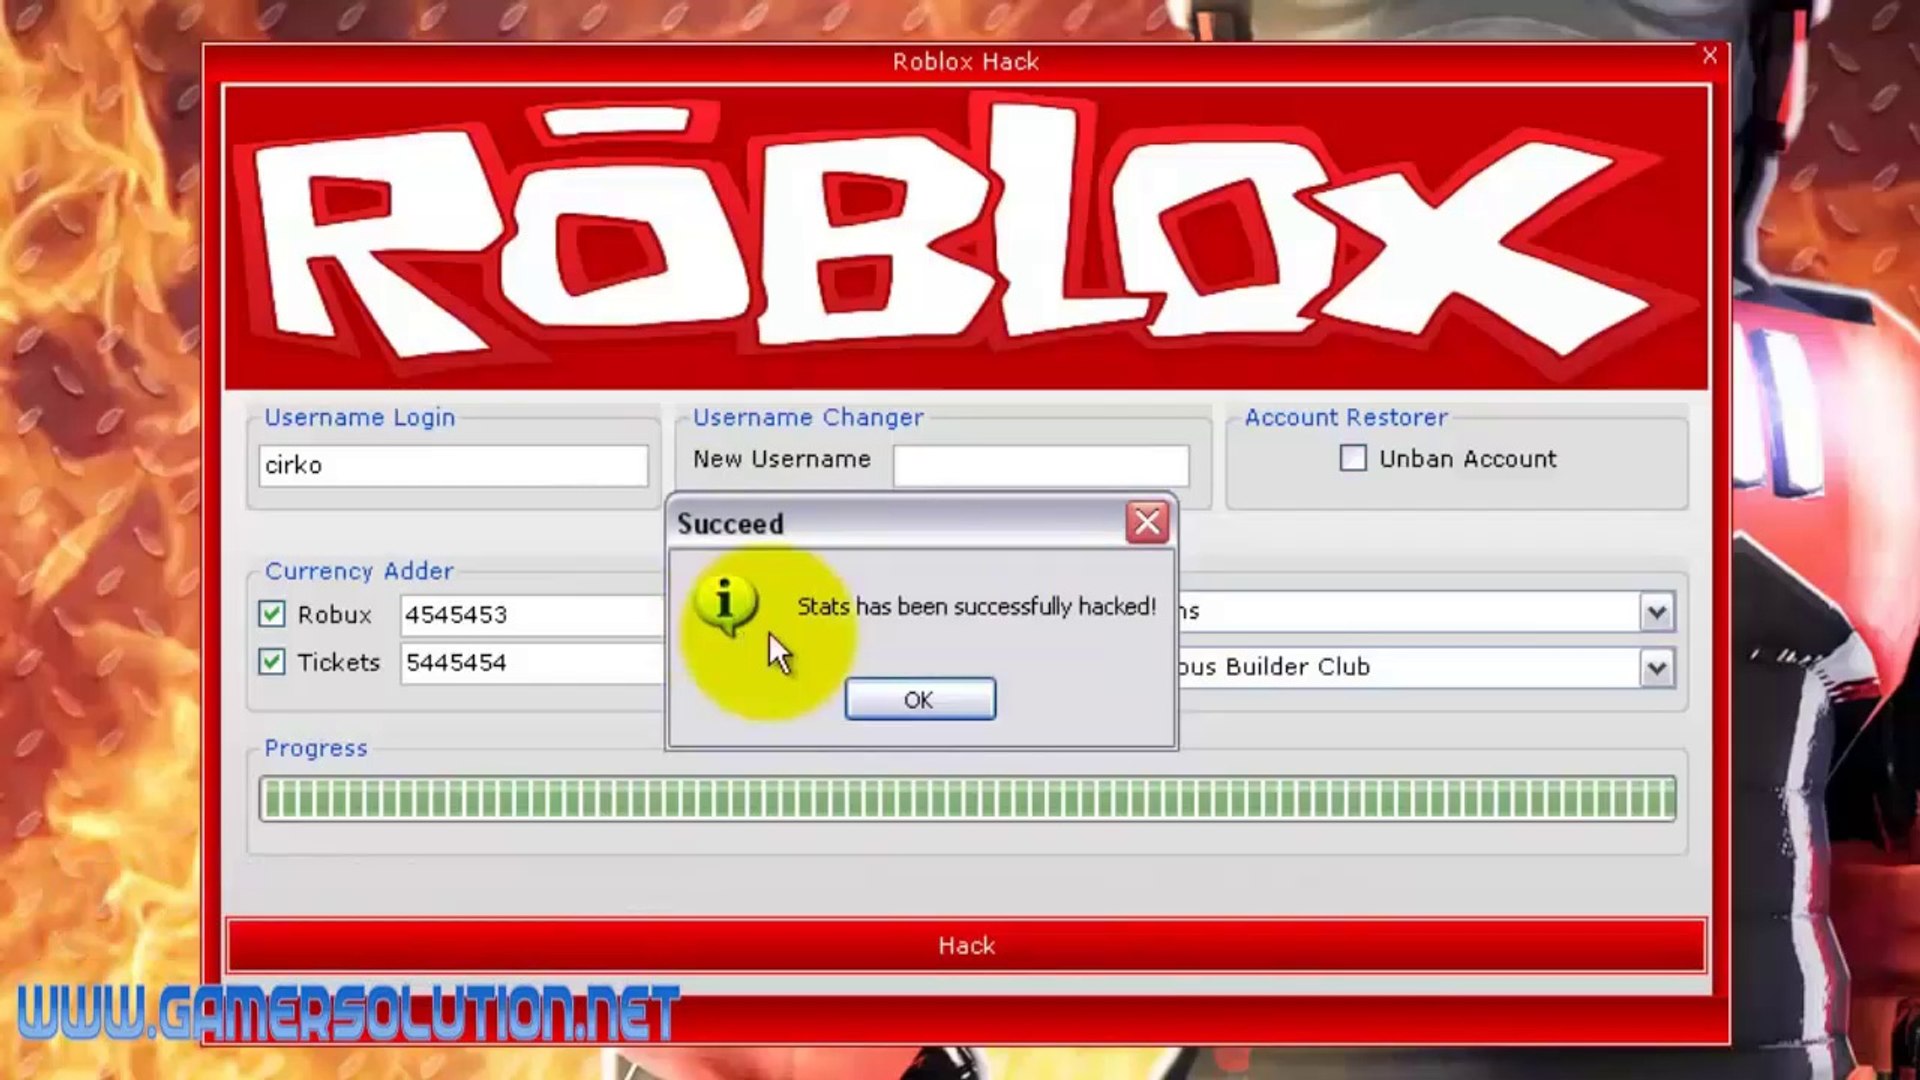 Roblox Hack Cheats Voice Tutorial Free Robux And Roblox Hack Video Dailymotion